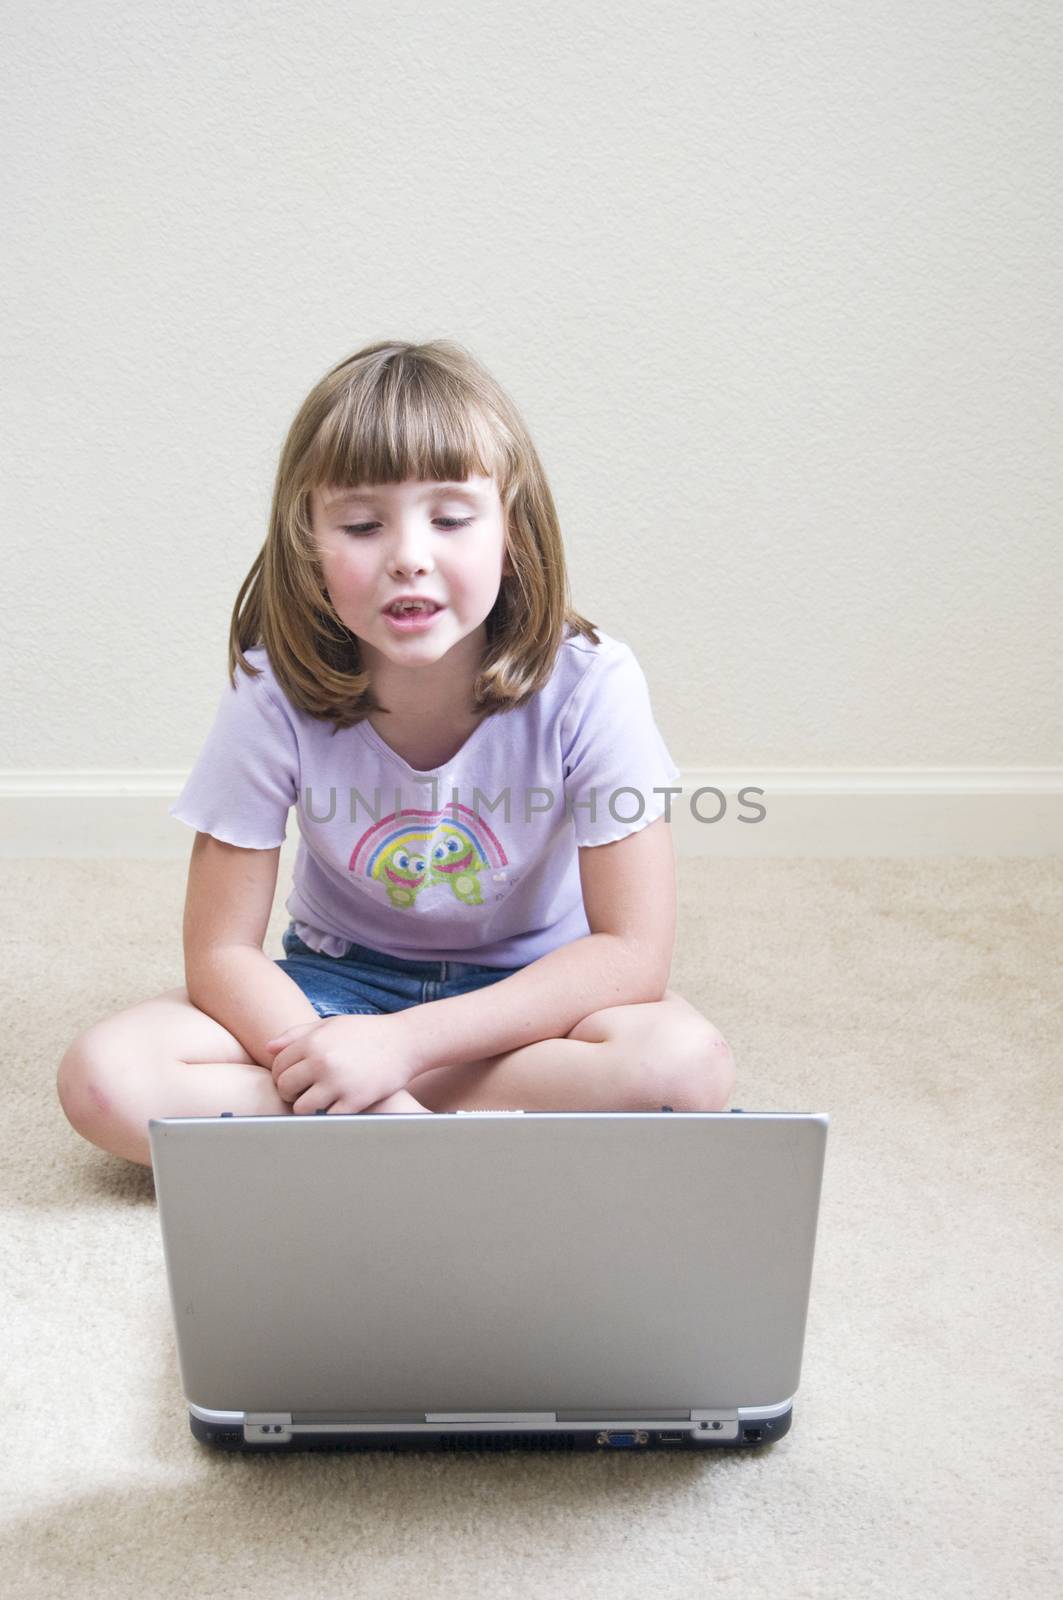 Cute little girl playing a game on a laptop computer while seated on the floor.